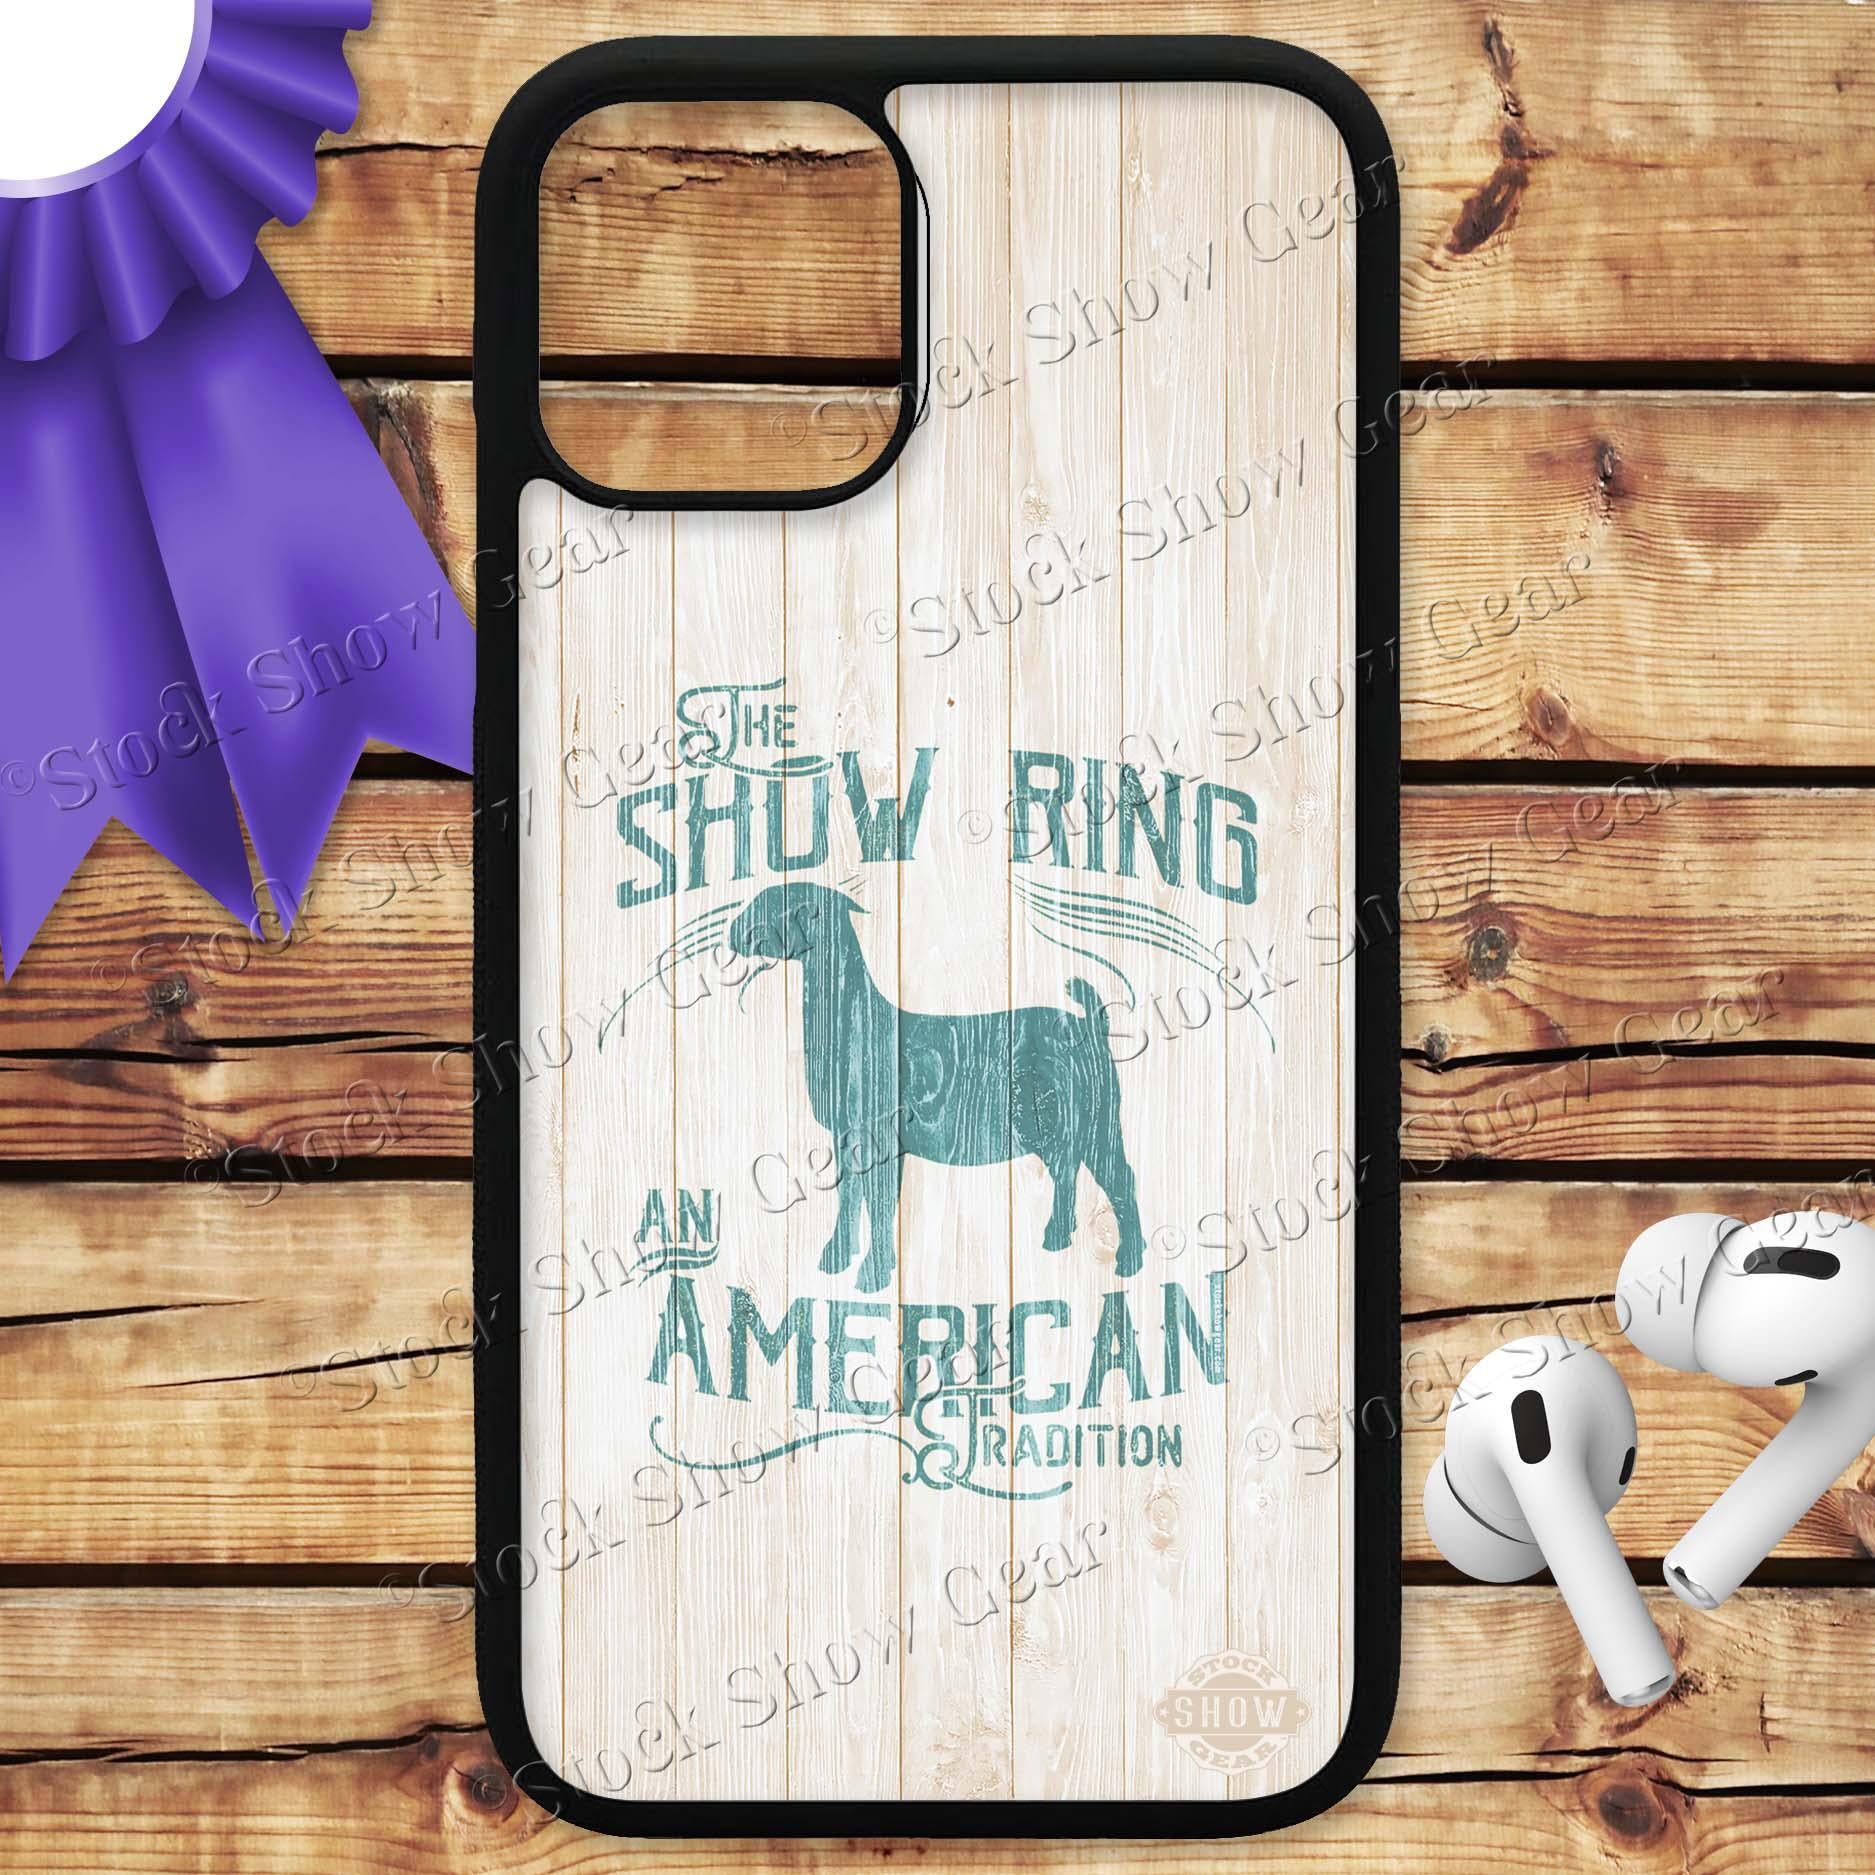 Goat "Show Ring" Phone Cases